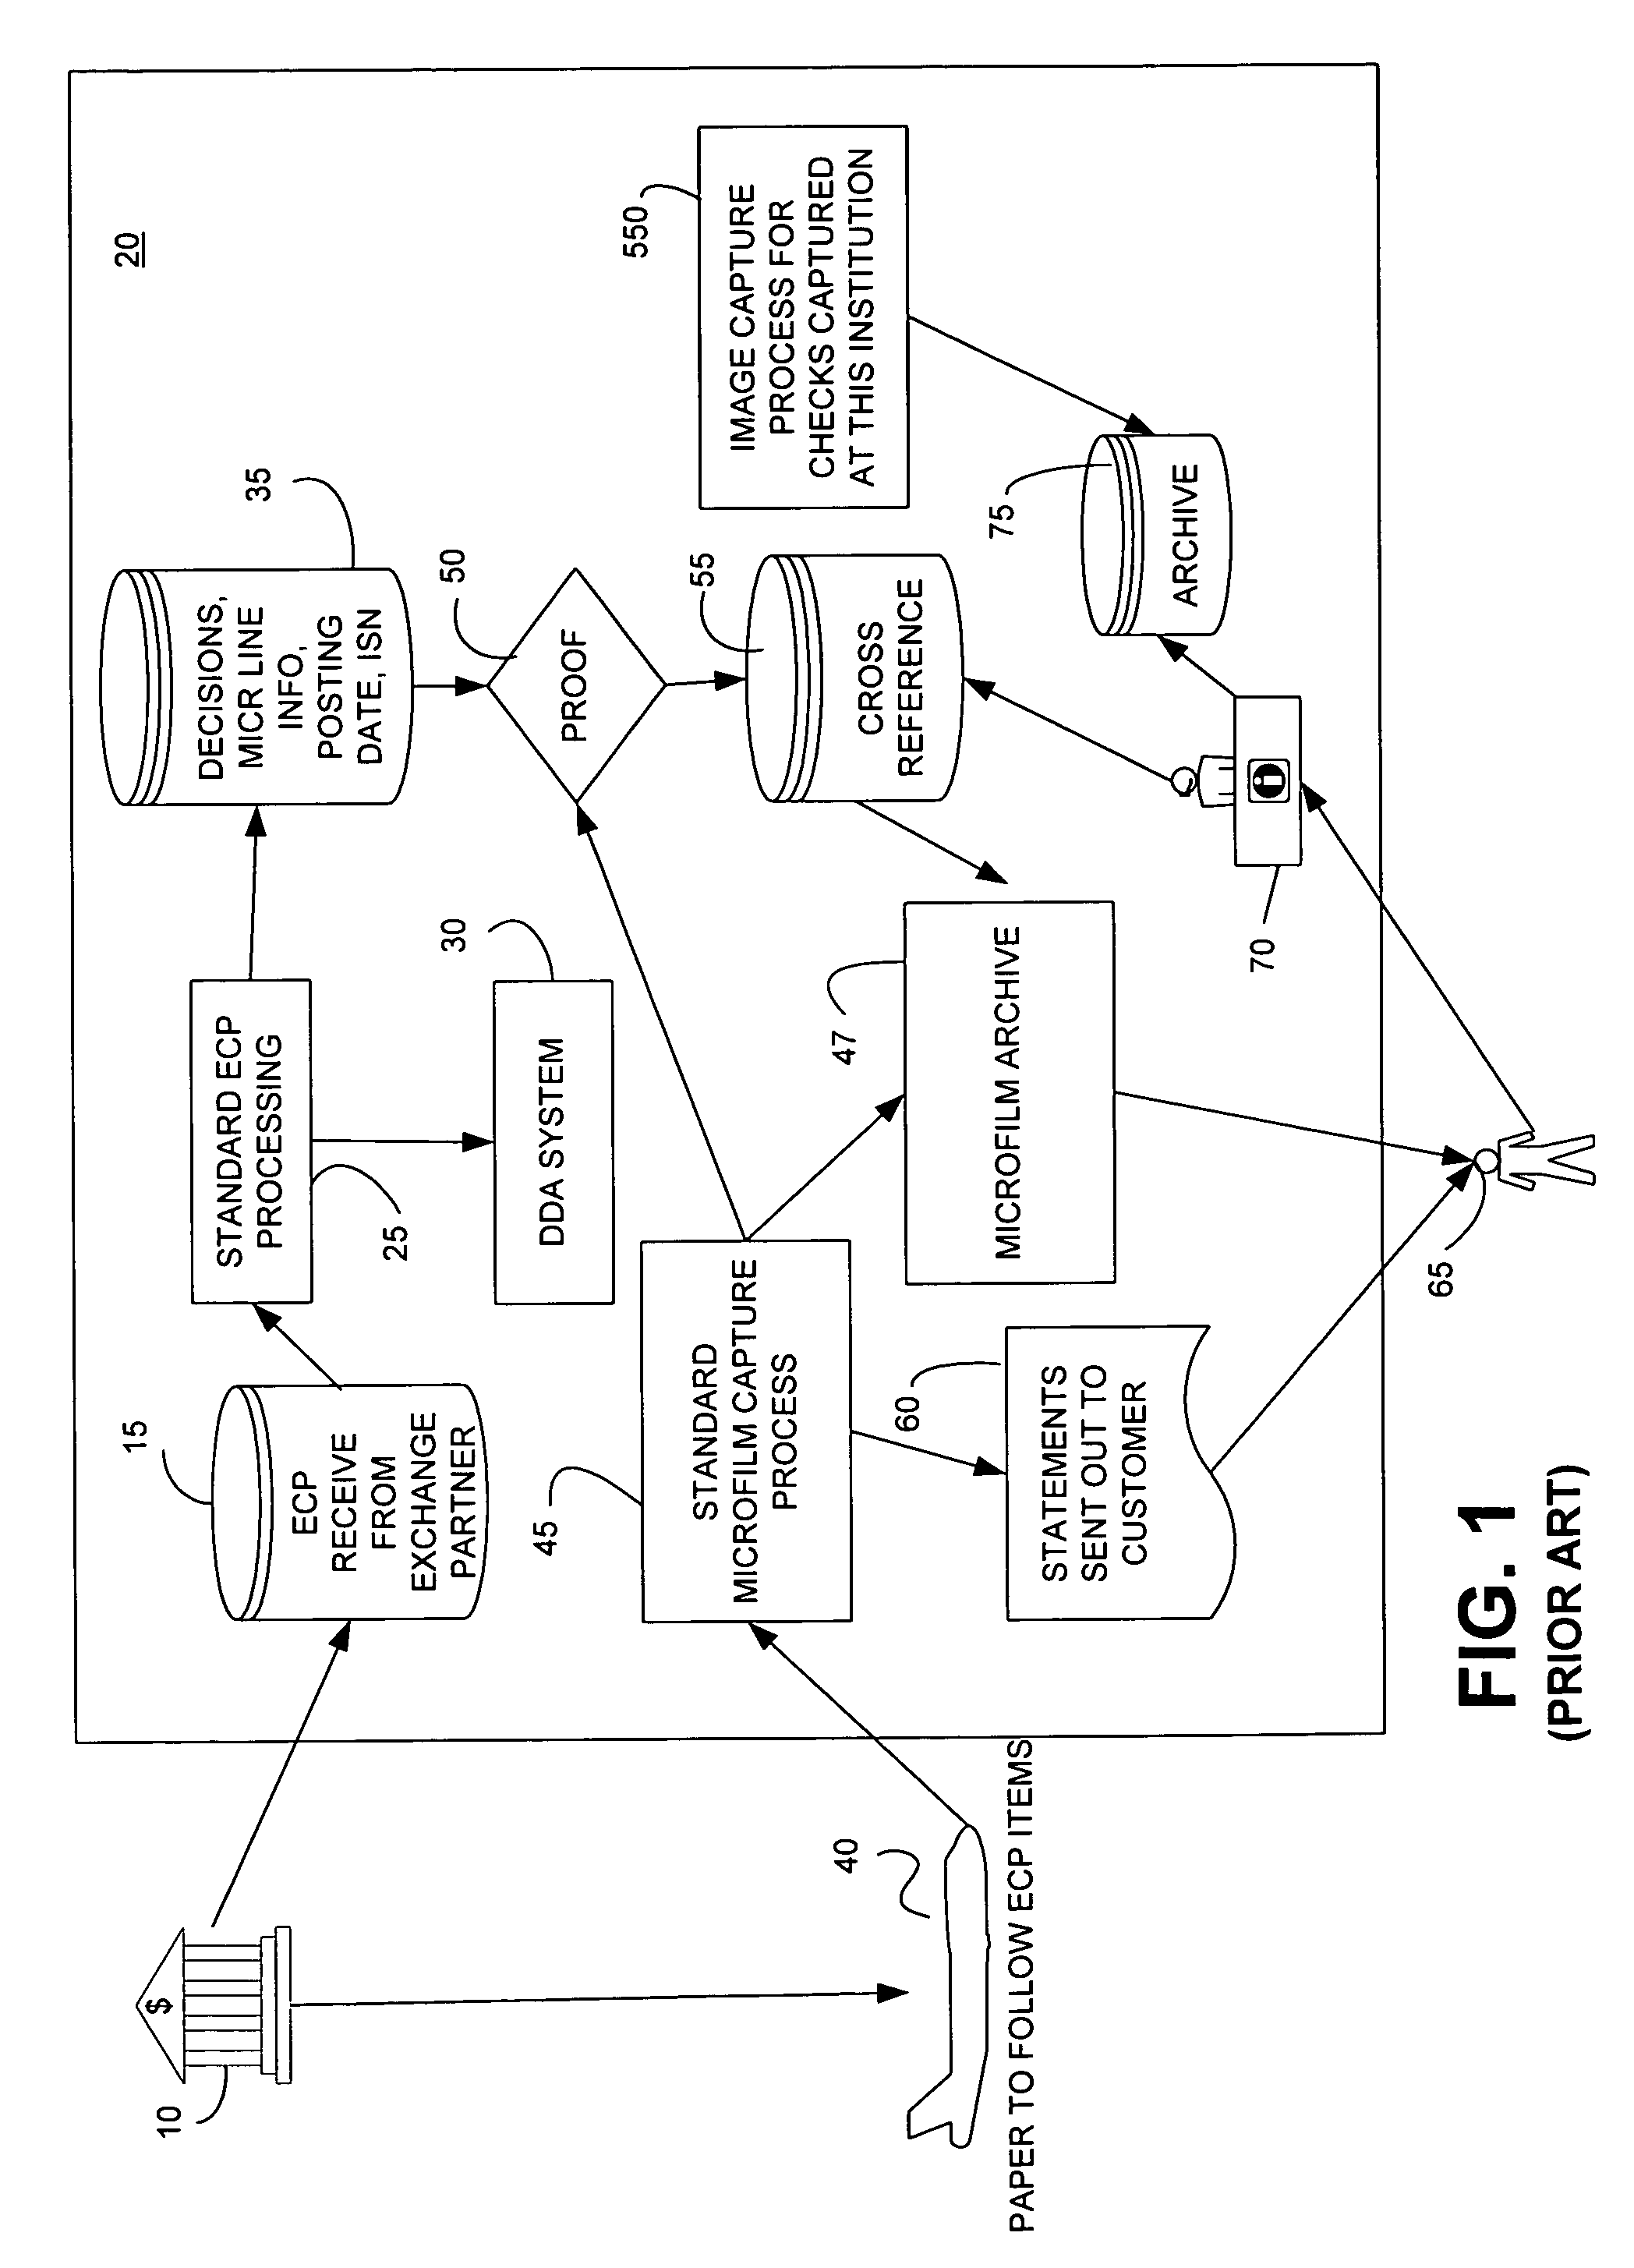 Electronic check presentment system and method having an item sequence capability